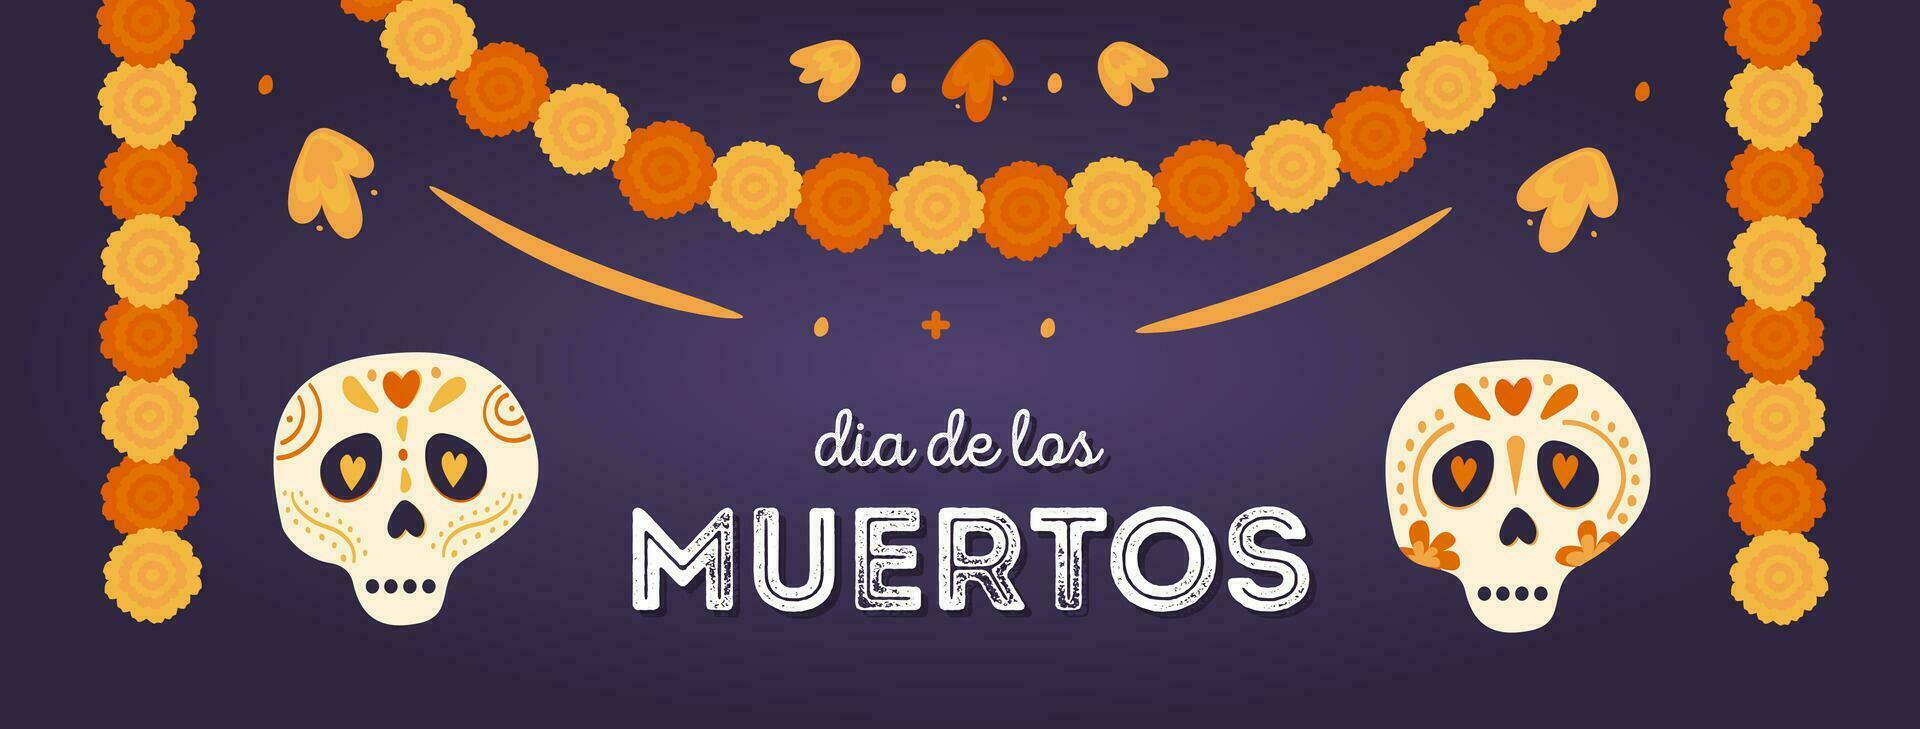 Dia de los muertos. Horizontal banner with sugar skulls and marigold floral garlands decoration. Mexican national holiday Day of the dead. Vector hand drawn illustration in flat style.